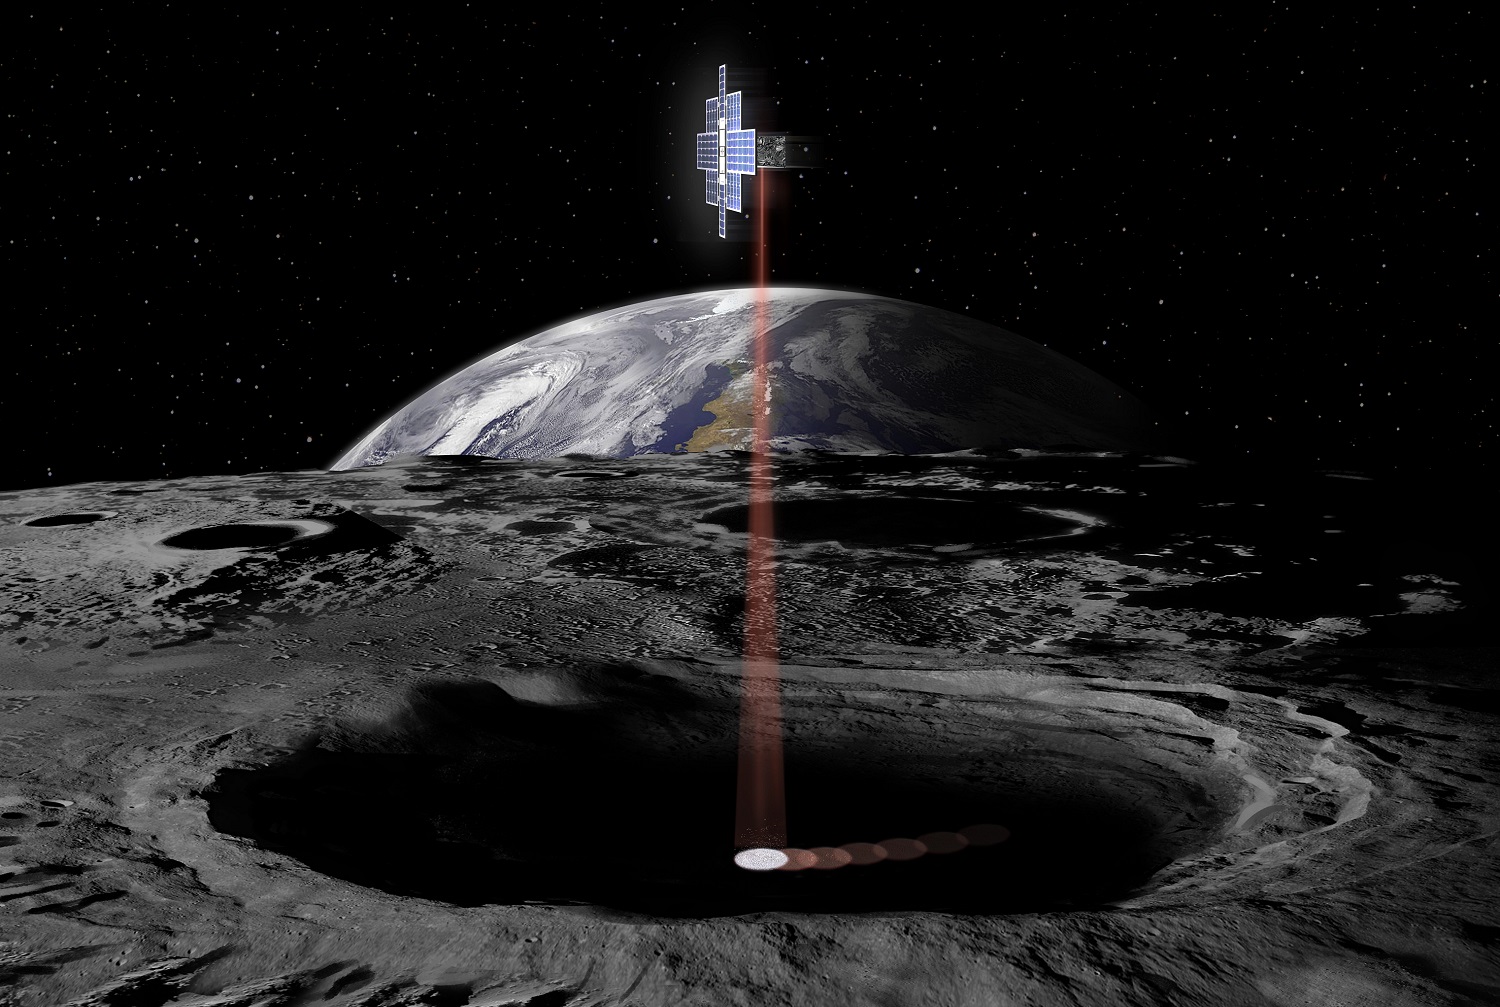 Artistic Rendering: CubeSat collecting data from a Moon Crater